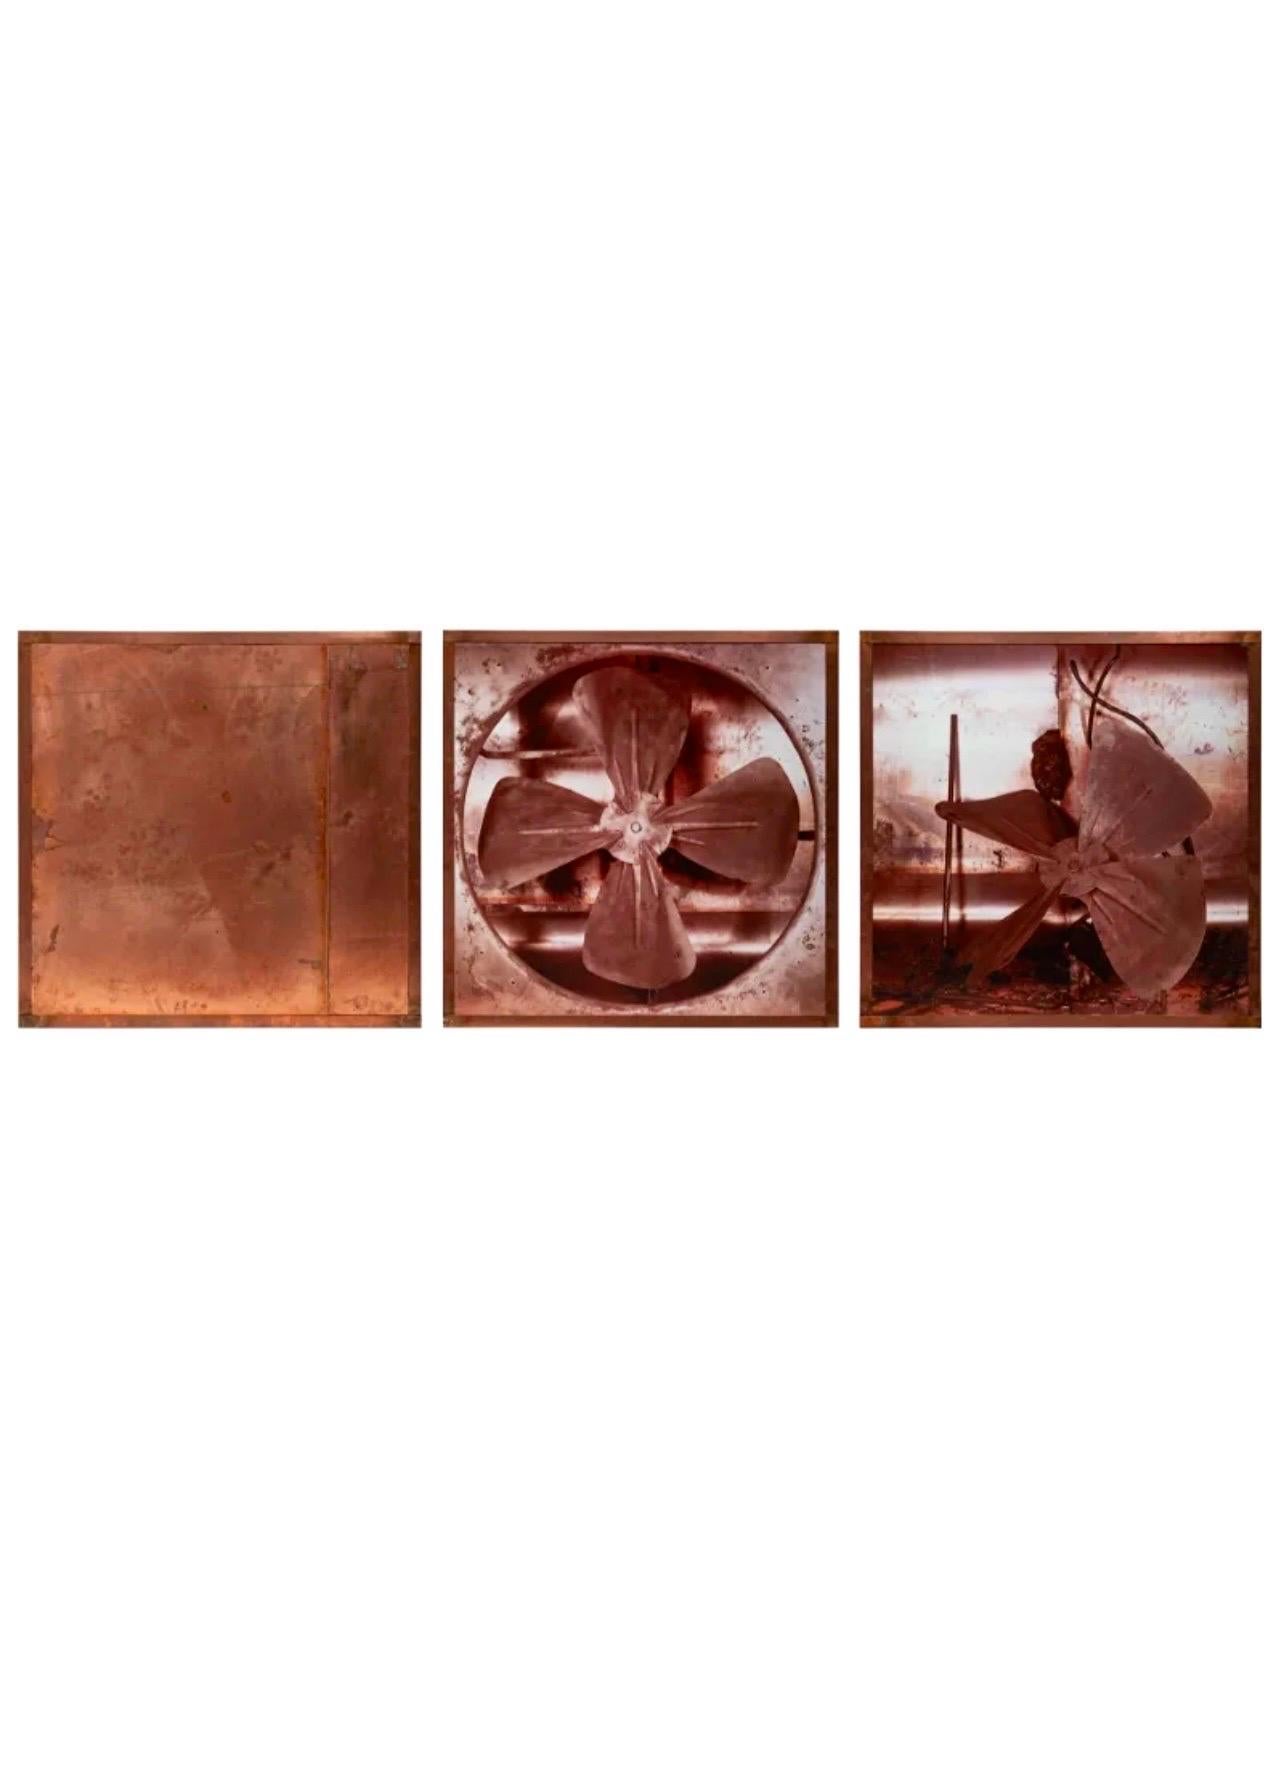 Large French Conceptual Sculpture Photograph Triptych Copper Frame Pascal Kern  For Sale 1